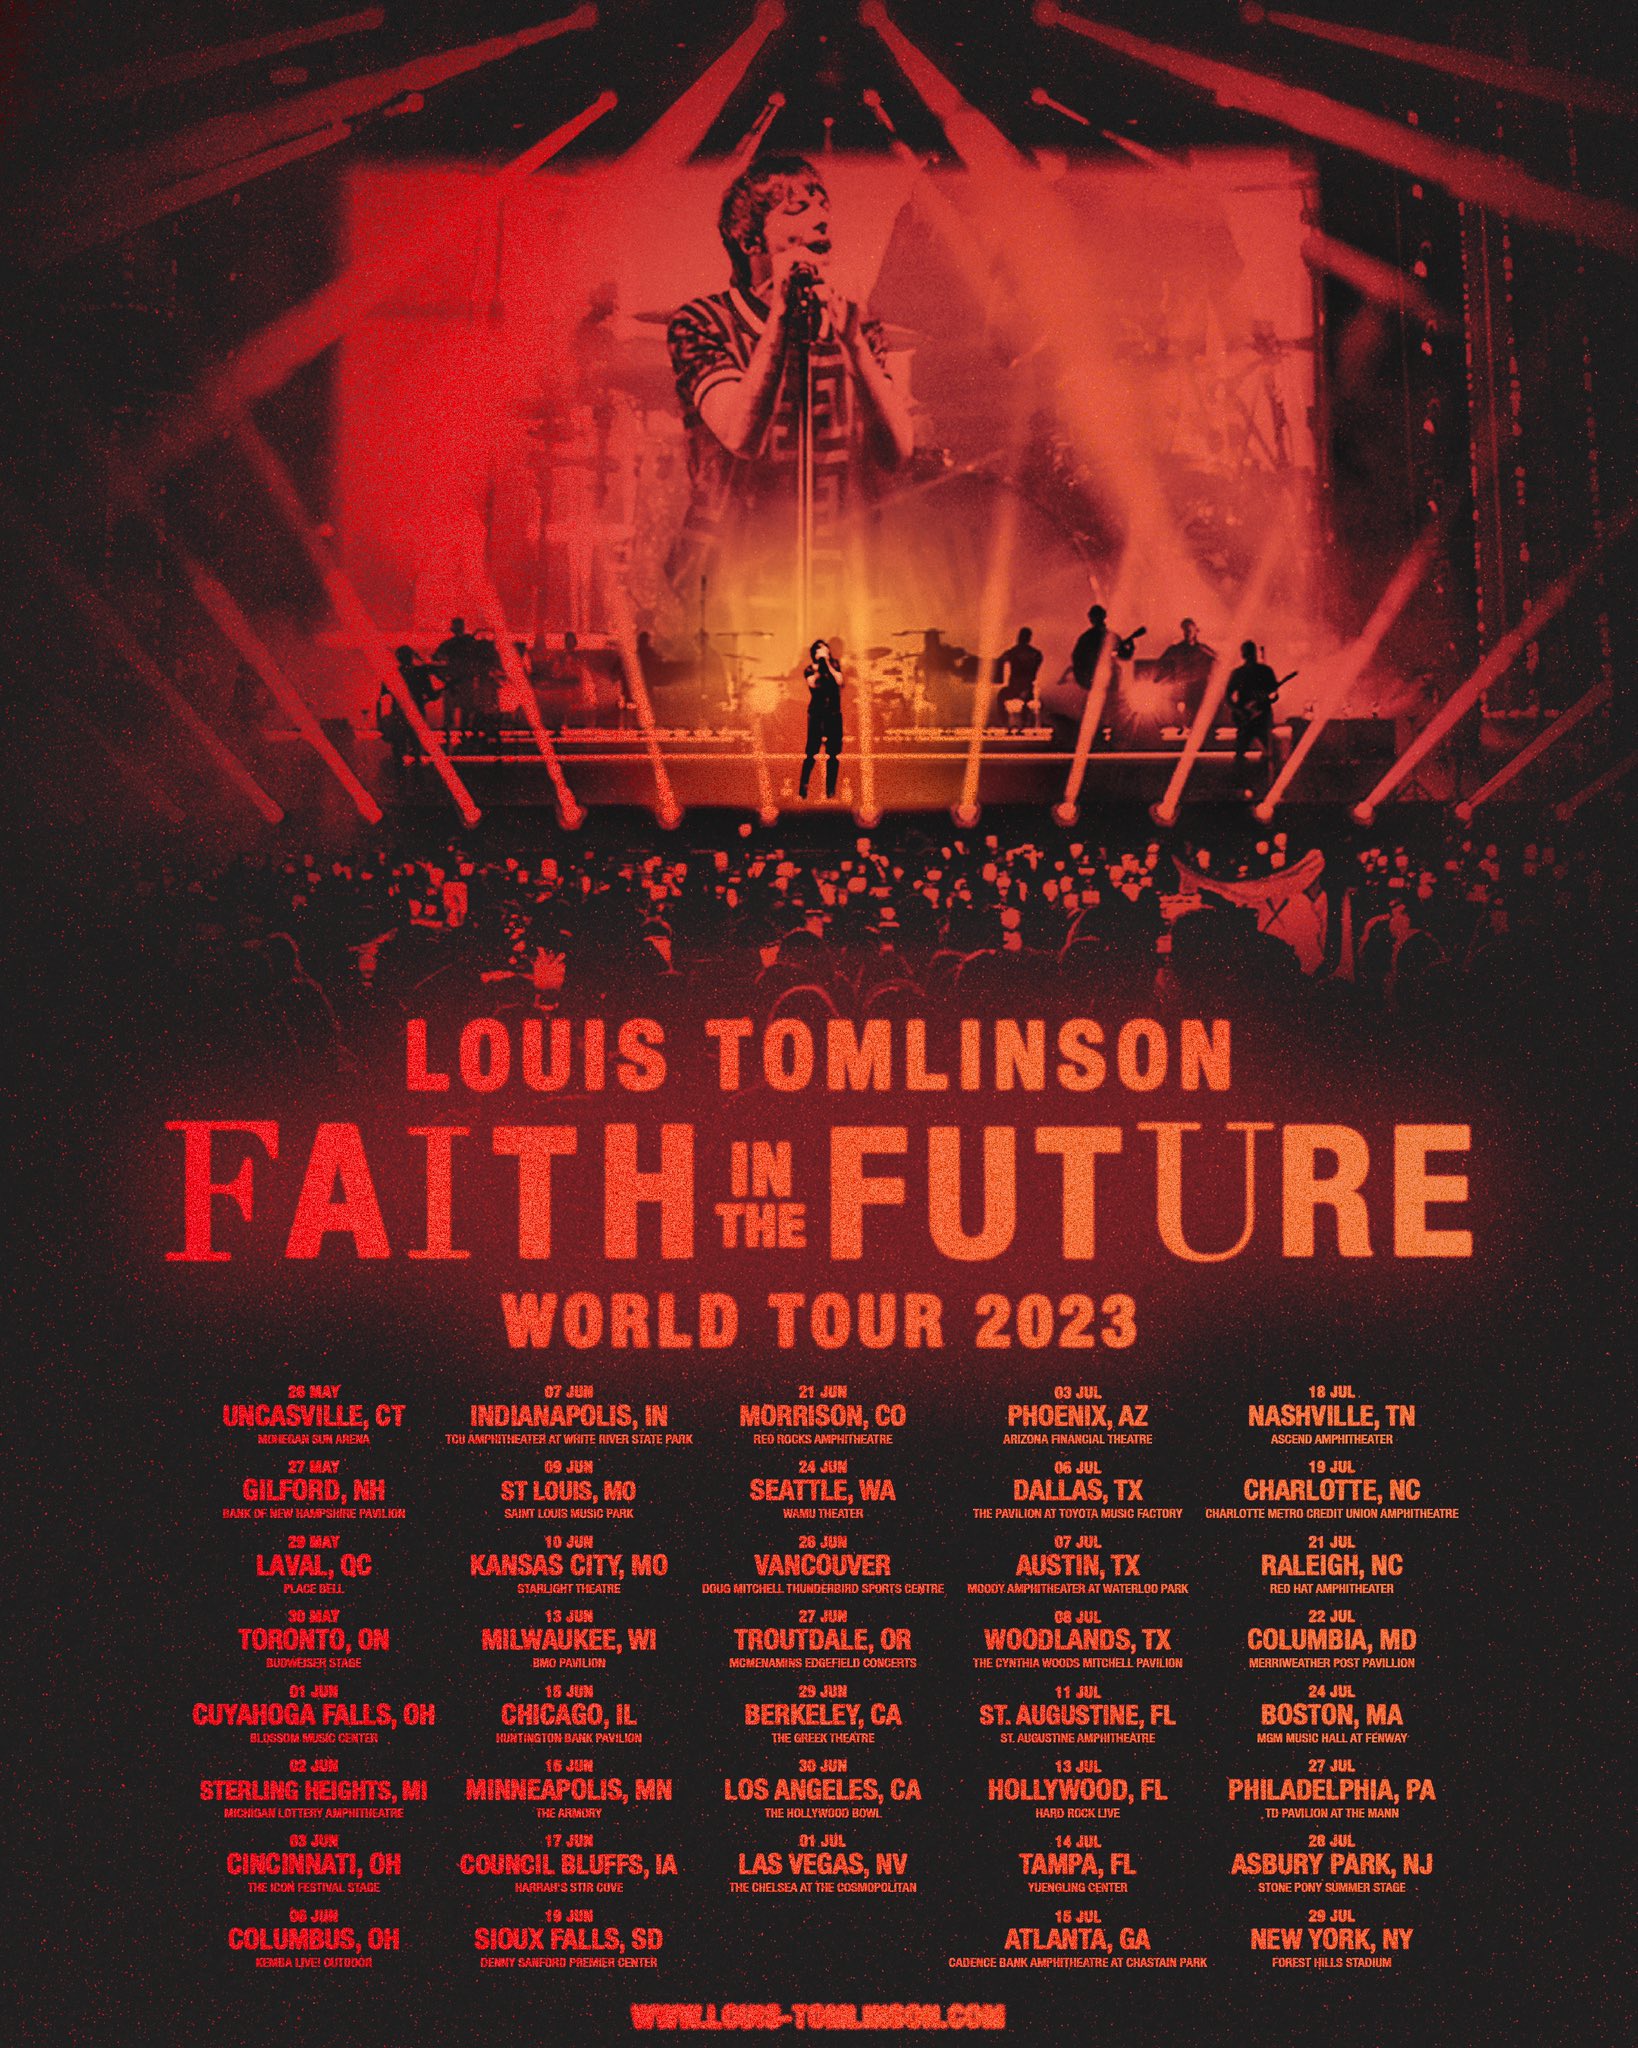 HL DAILY — @lthqofficial posted Louis' poster for tonight in